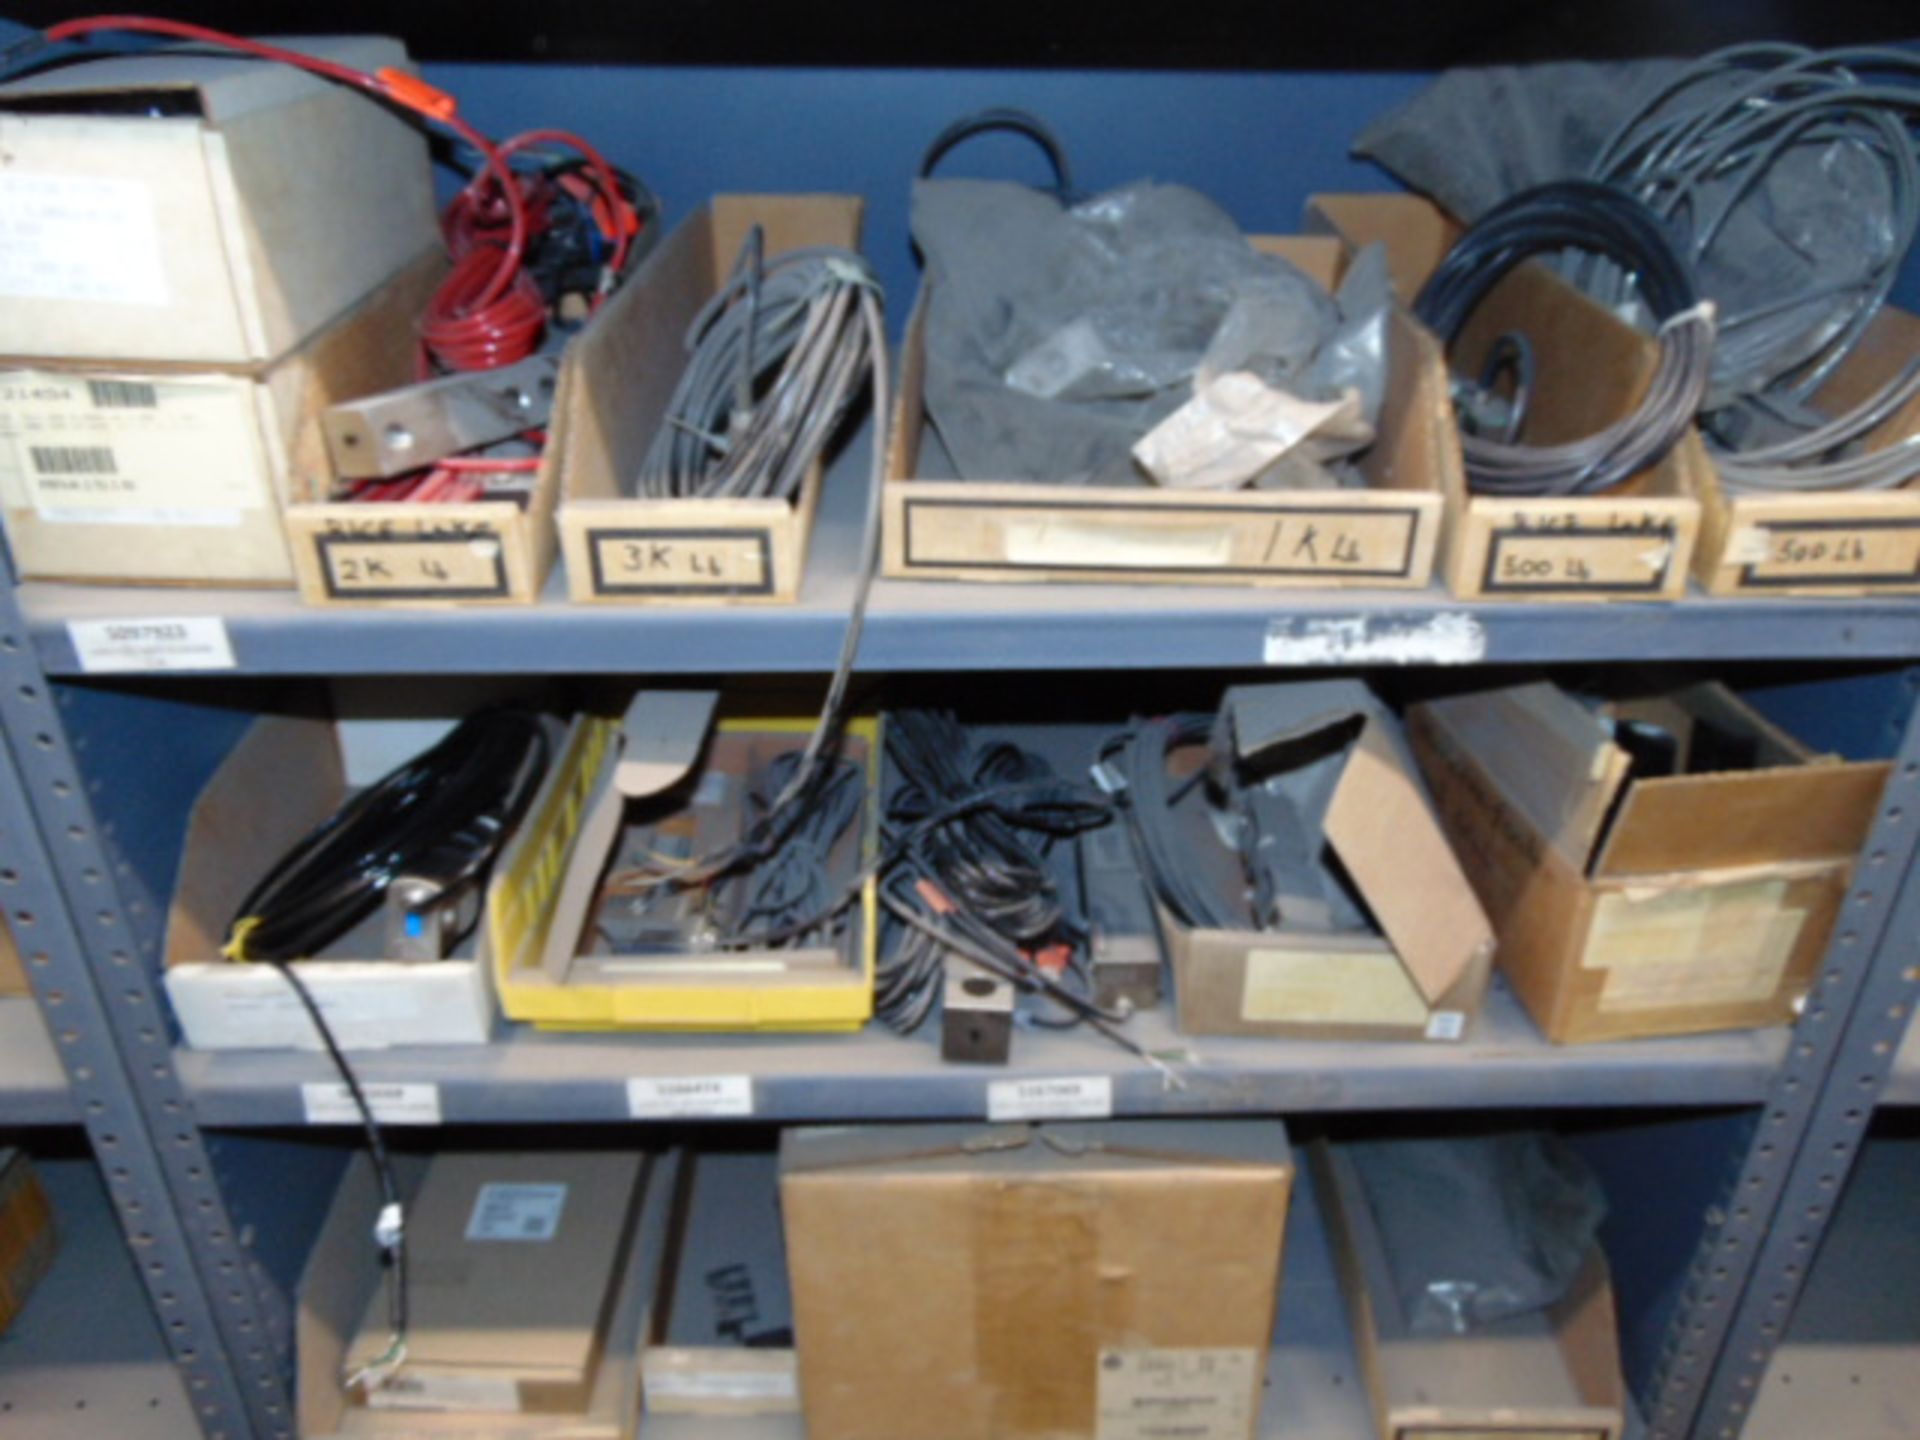 LOT CONSISTING OF: A & B control AC modules, A & B controllers, assorted cables & misc., assorted ( - Image 2 of 7